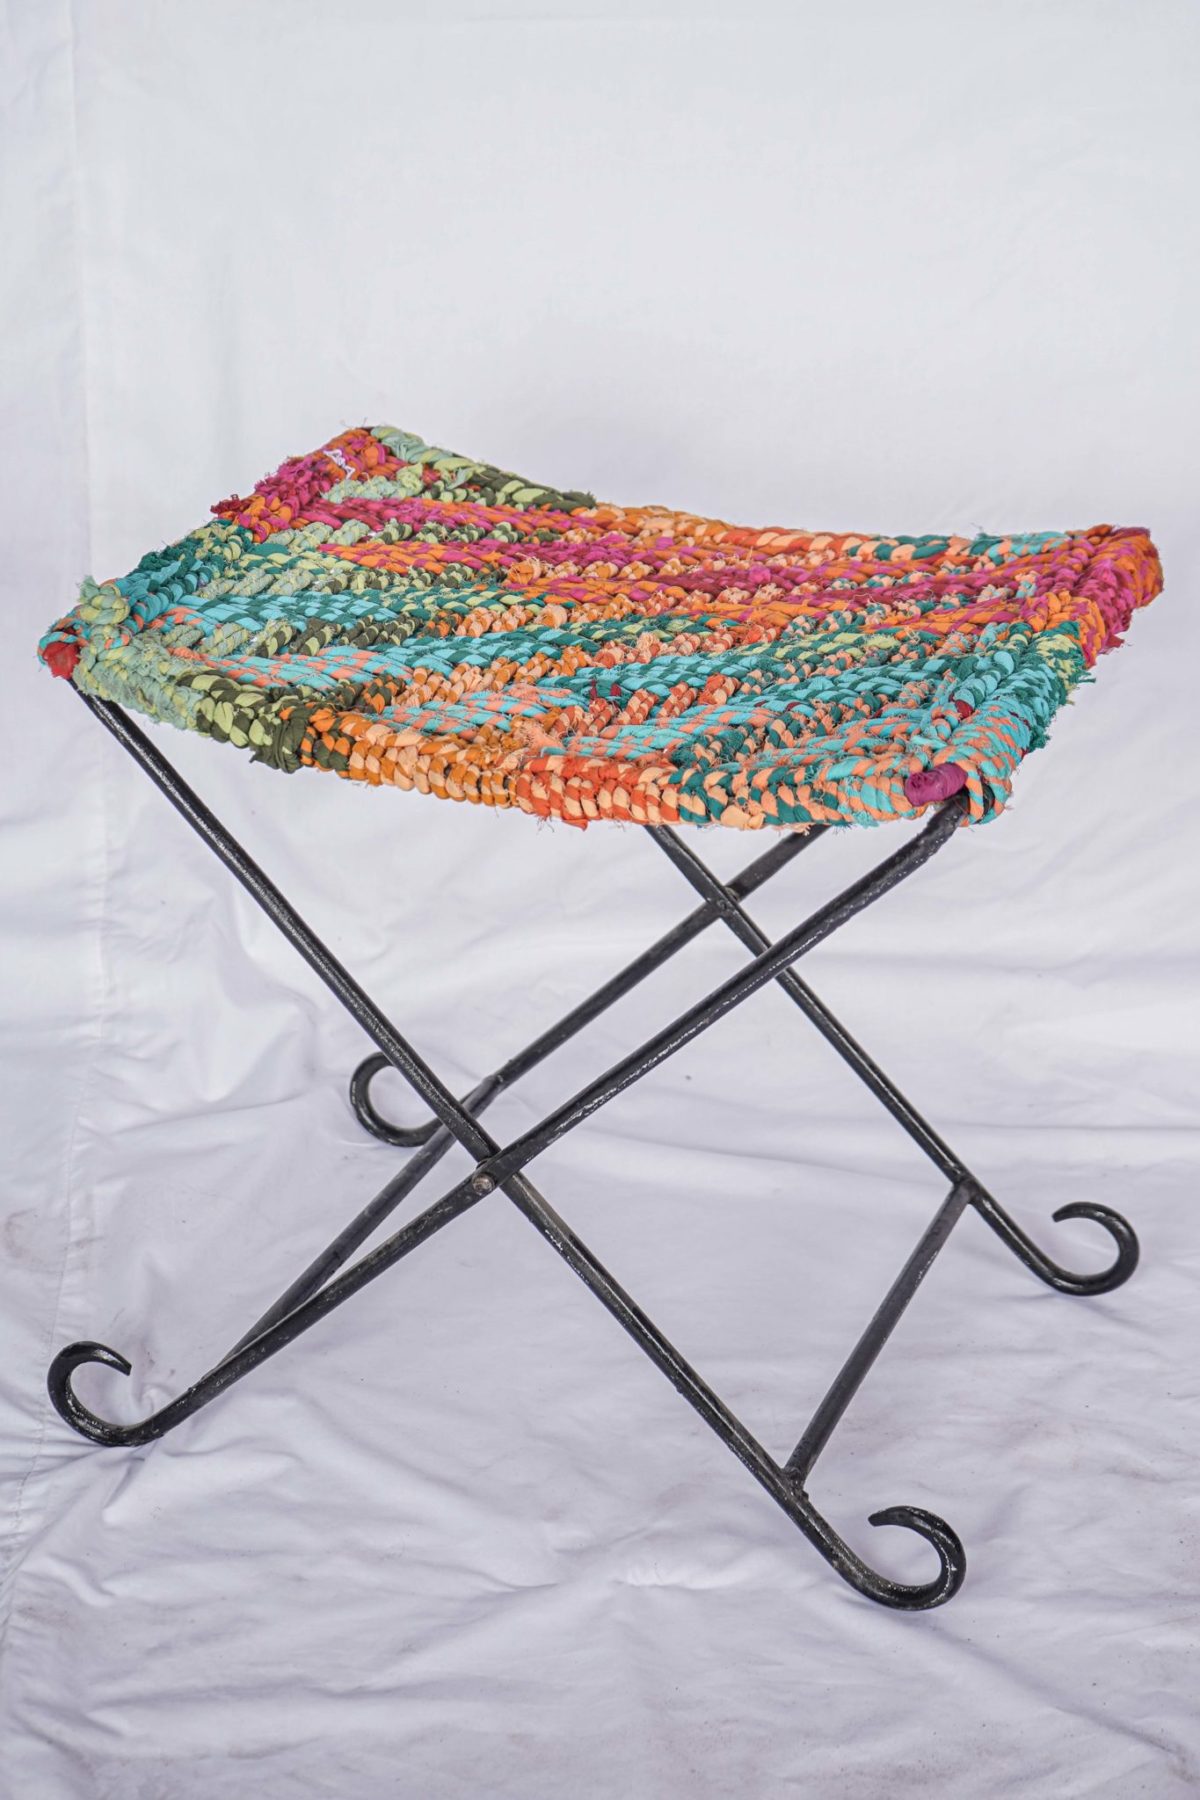 Turquoise Color Chair Vintage Stool Weaving Cotton